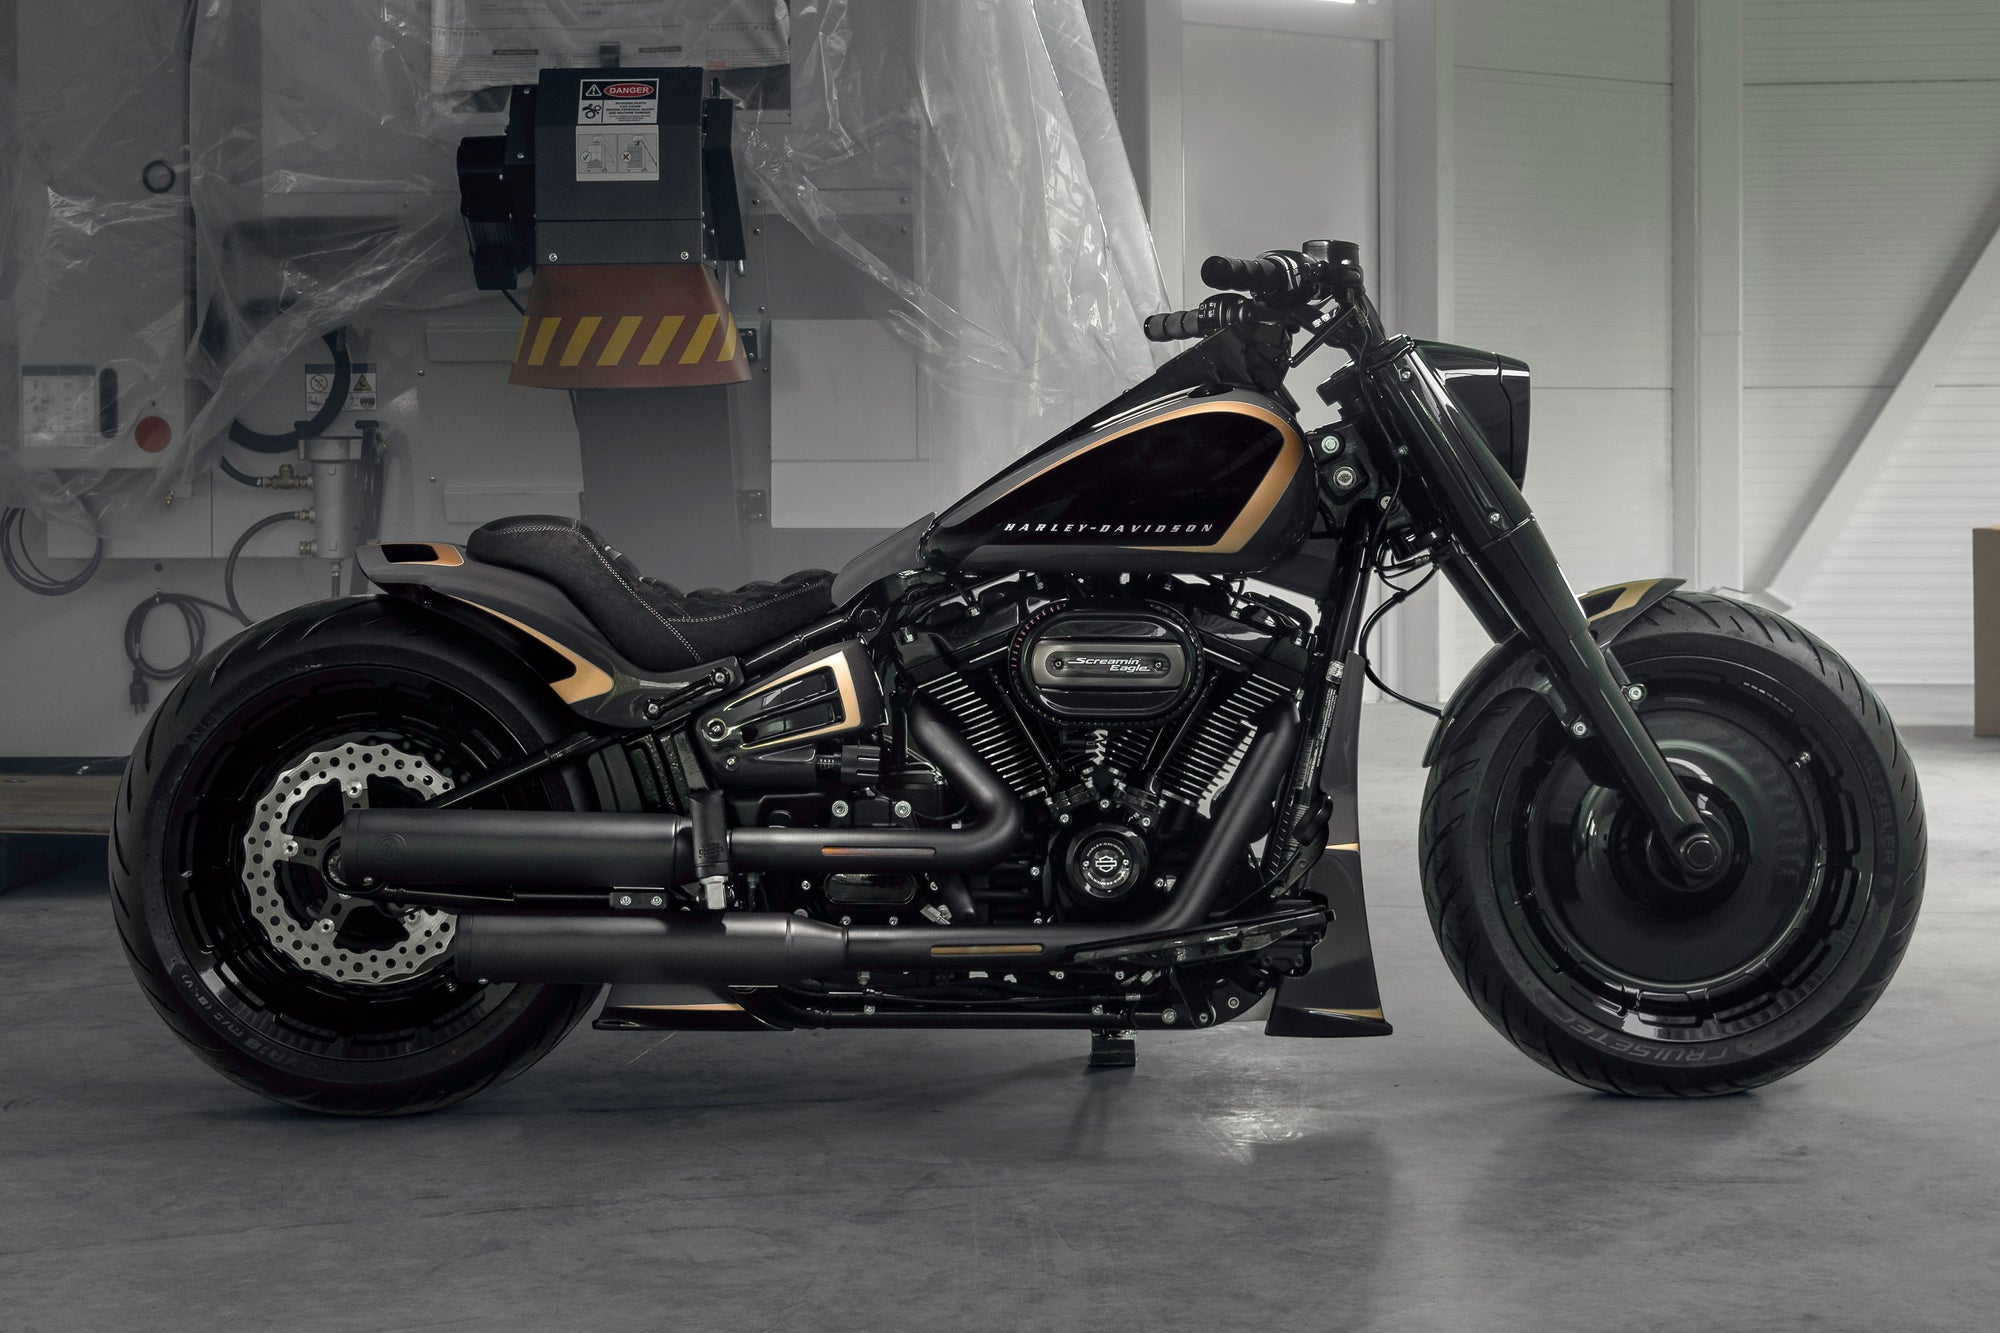 Modified Harley Davidson Fat Boy motorcycle with Killer Custom parts from the side in a modern garage with some equipment in the background